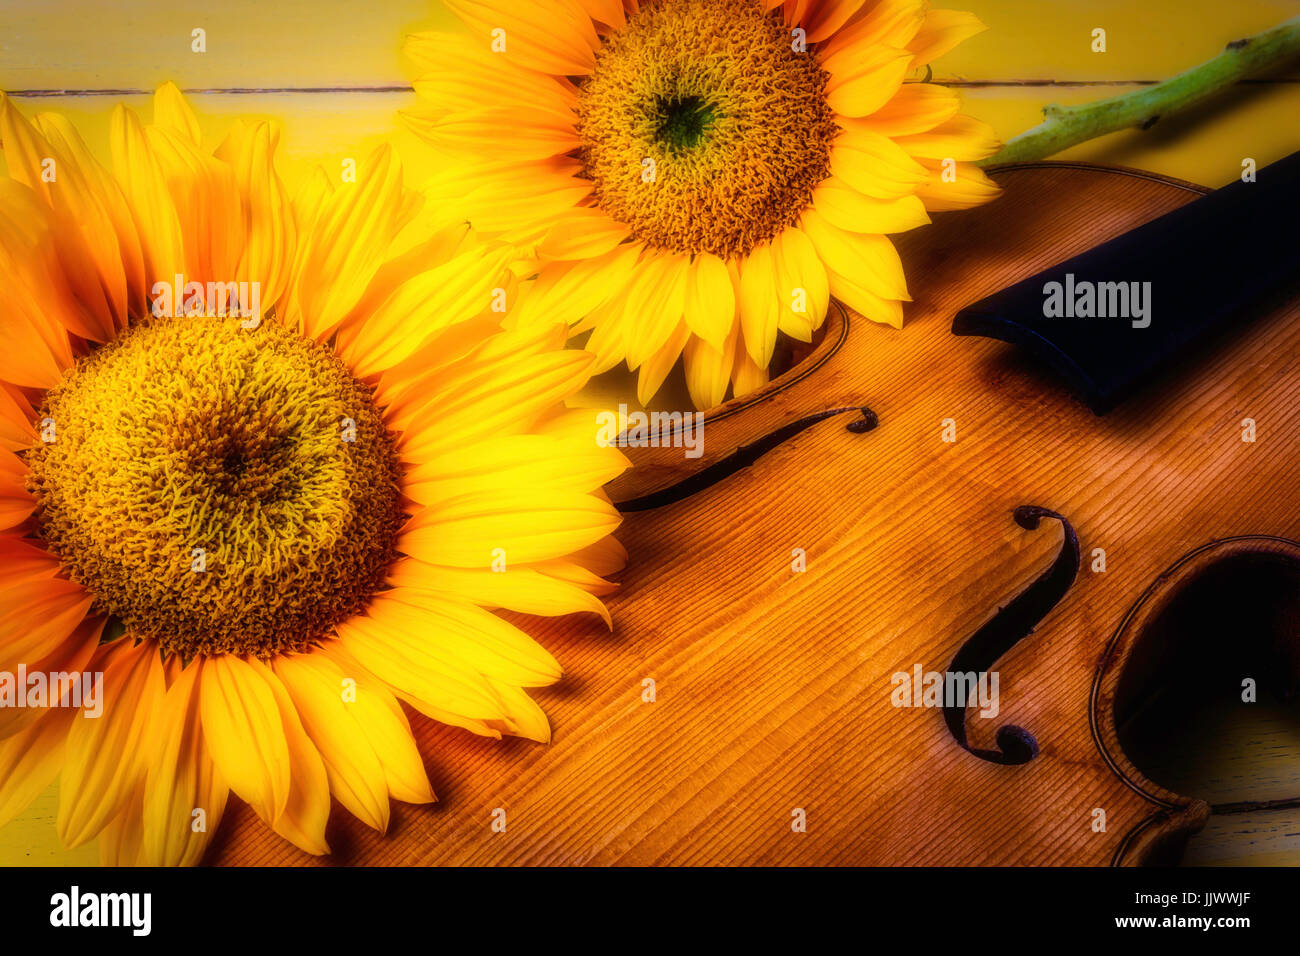 Sunflowers And Old Violin Stock Photo